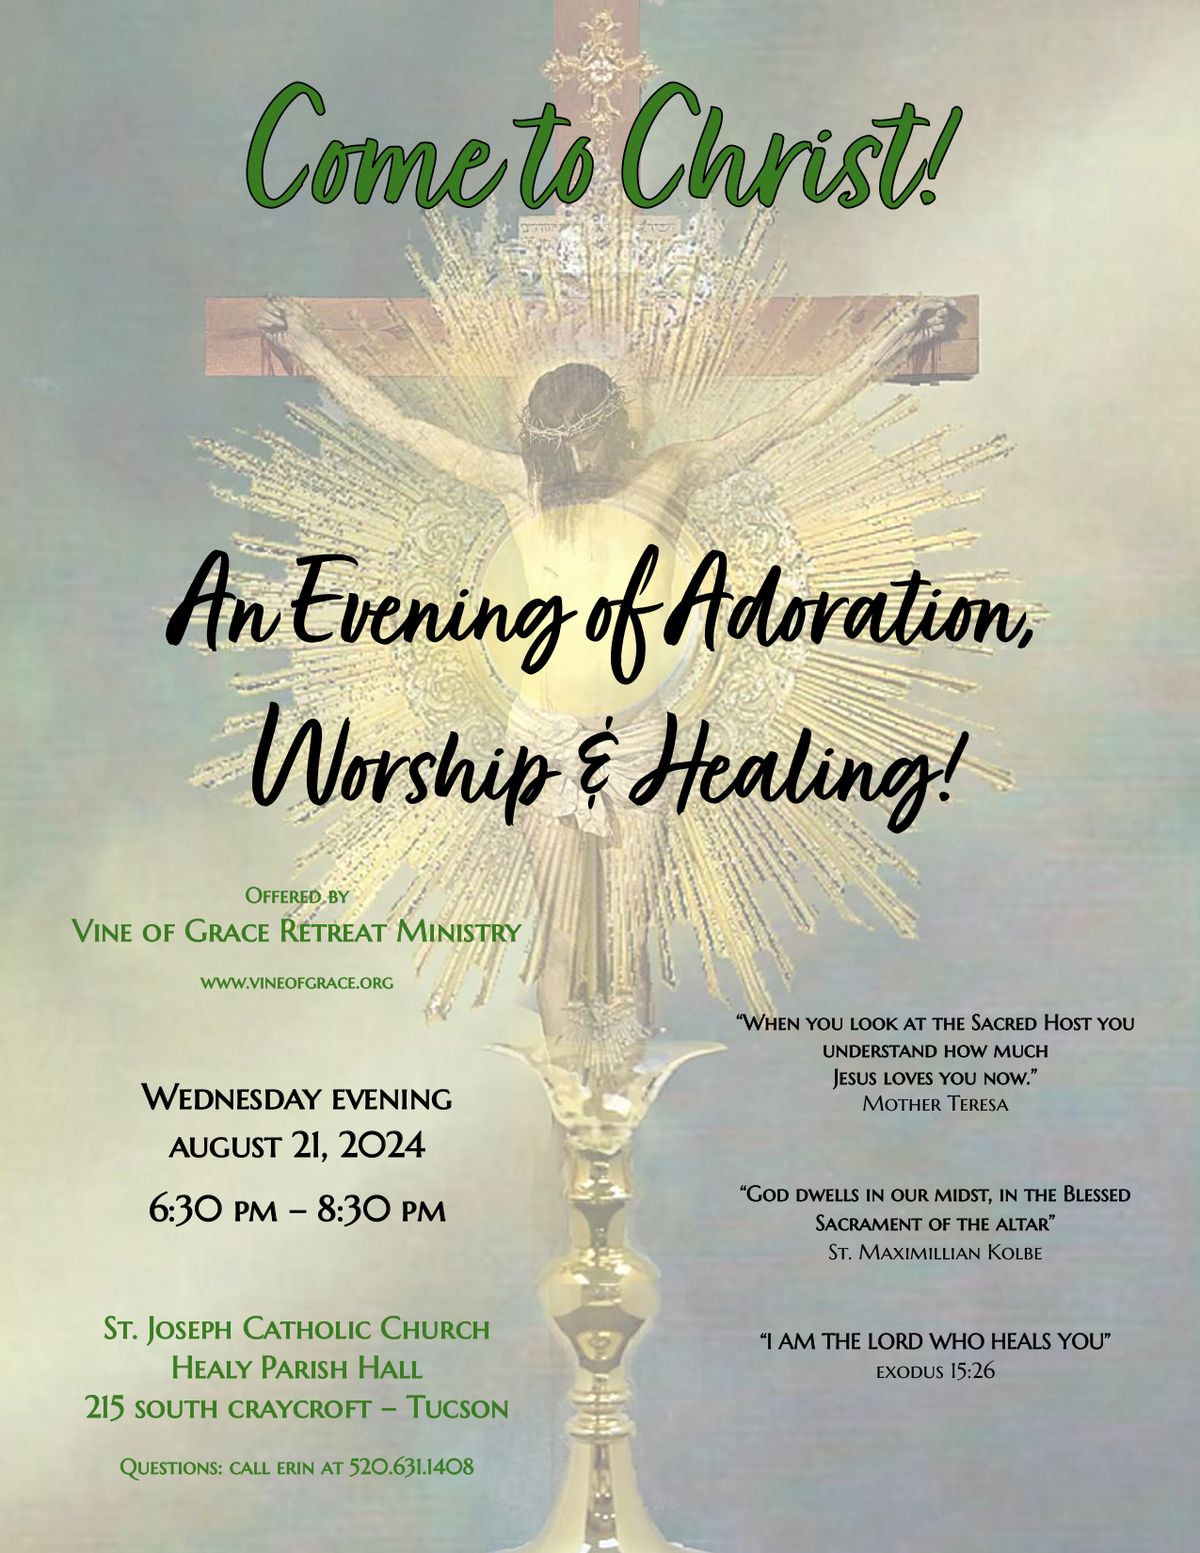 Vine Of Grace: An Evening of Adoration, Worship and Healing!